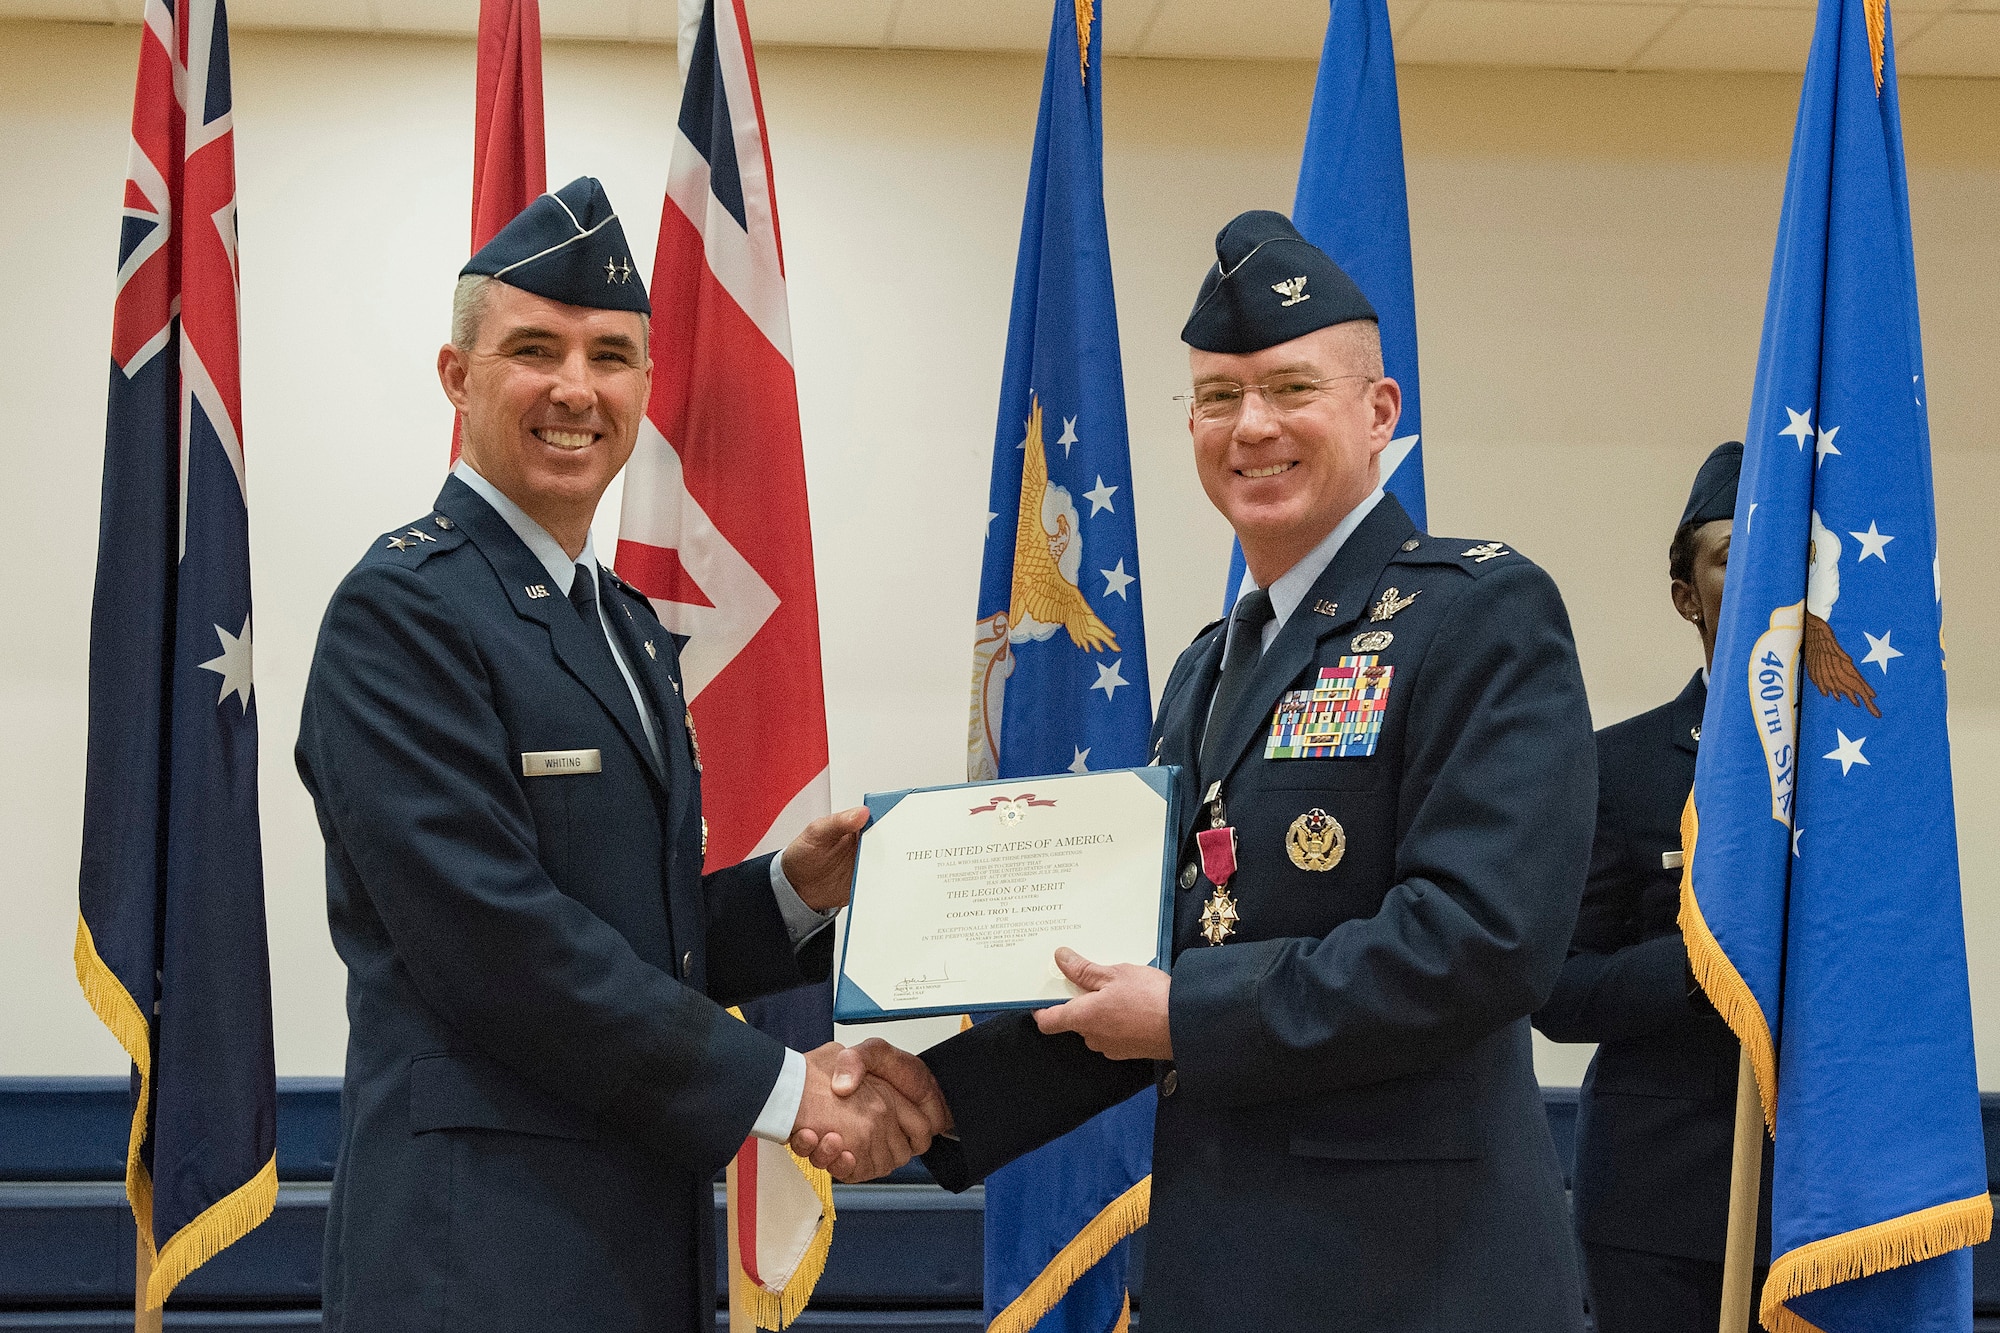 Maj. Gen. Stephen Whiting, 14th Air Force commander, presents the Legion of Merit medal to Col. Troy Endicott, 460th Space Wing outgoing commander, at the 460th SW change of command ceremony May 3, 2019, on Buckley Air Force Base, Colorado.